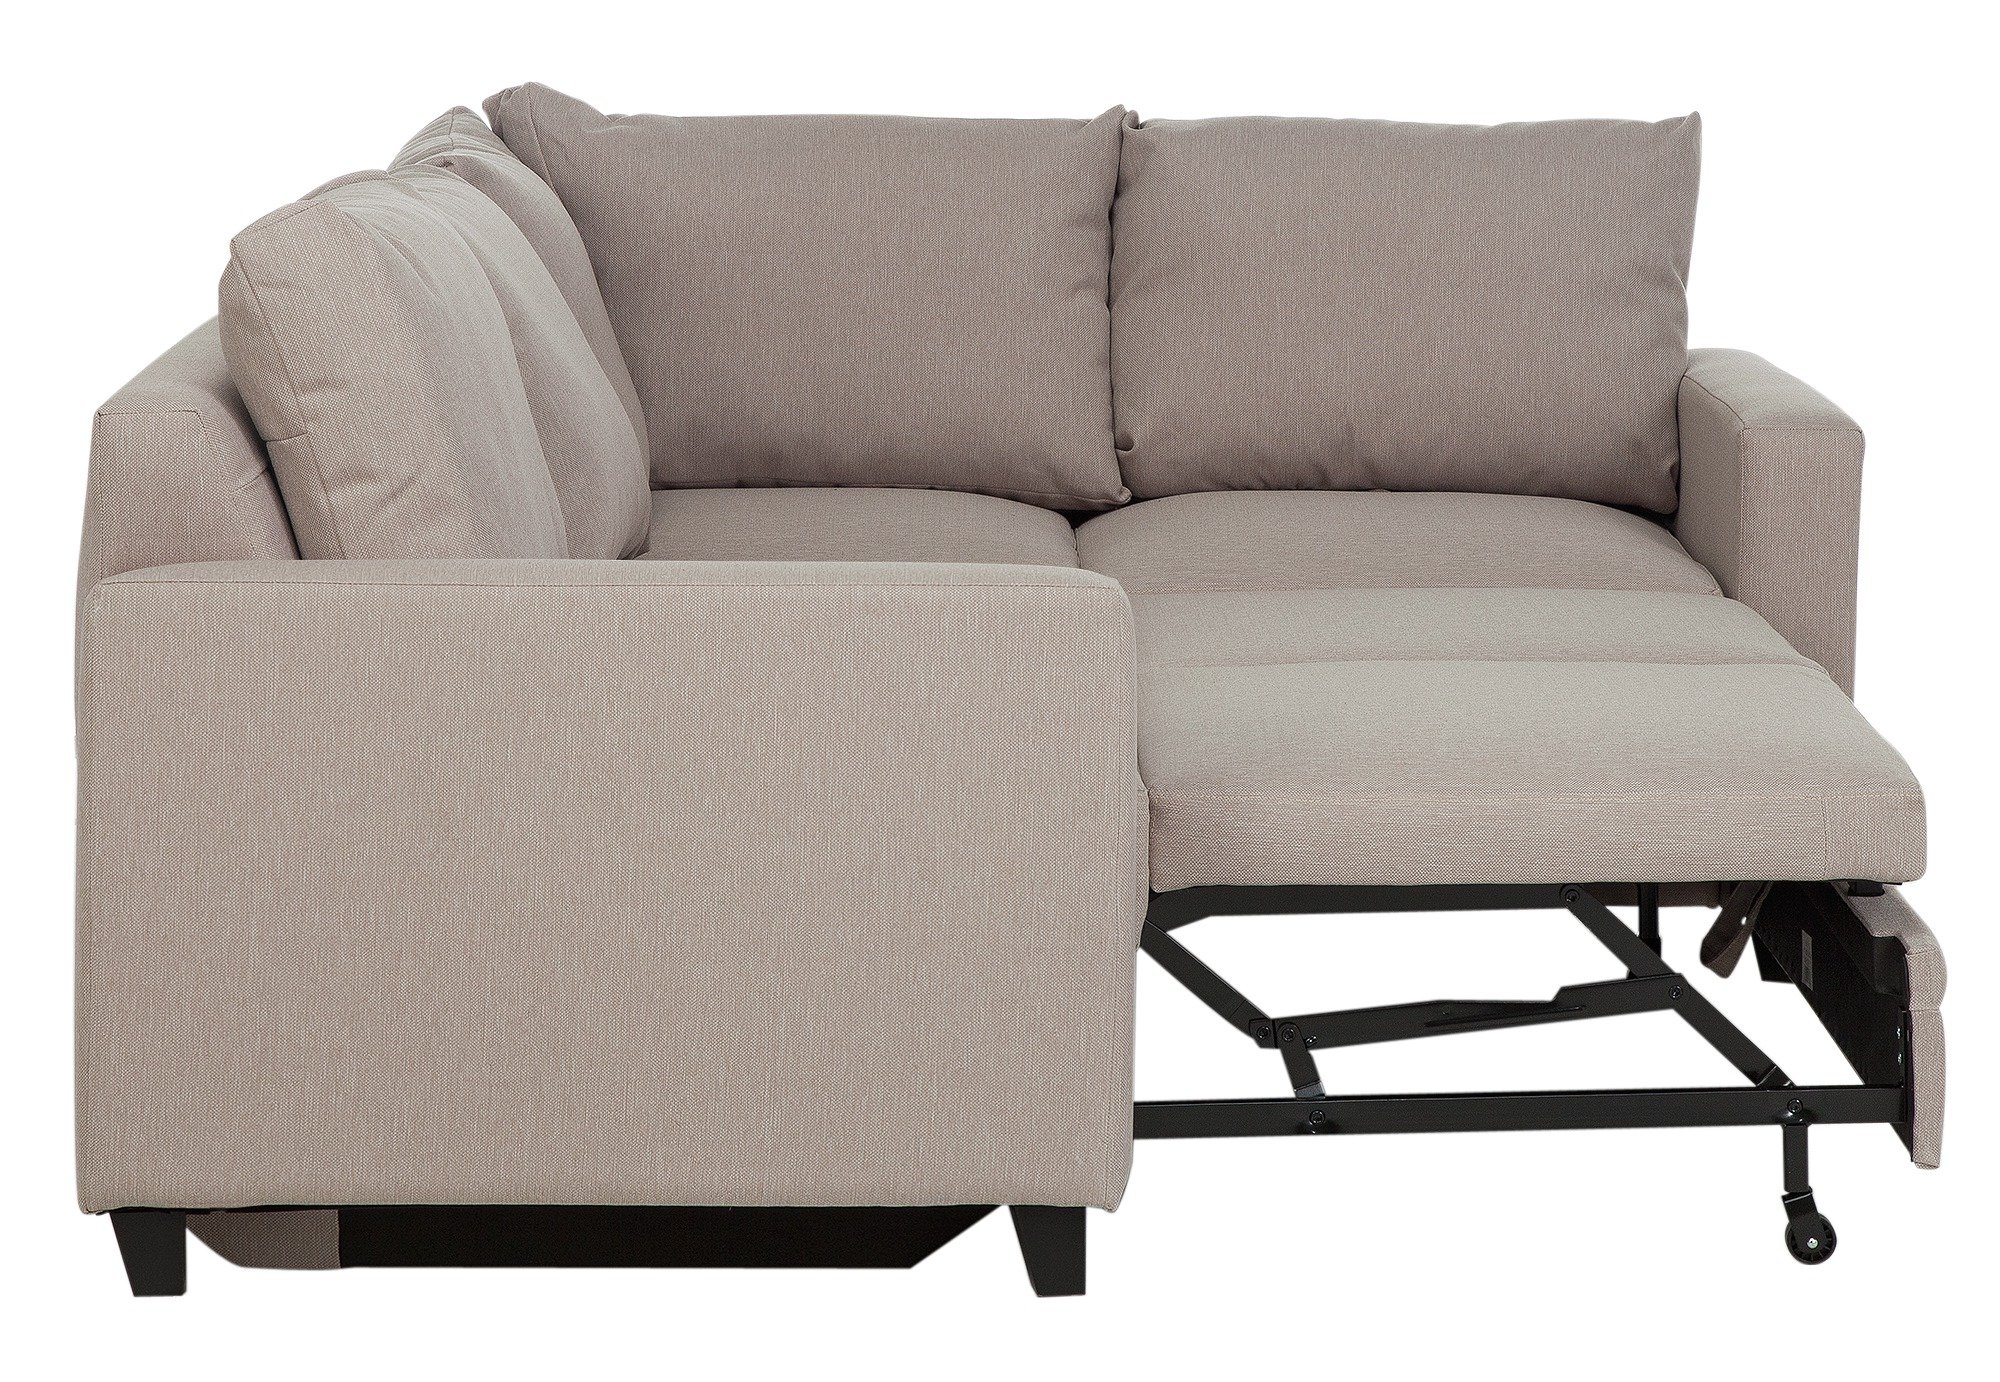 hygena seattle right hand sofa bed